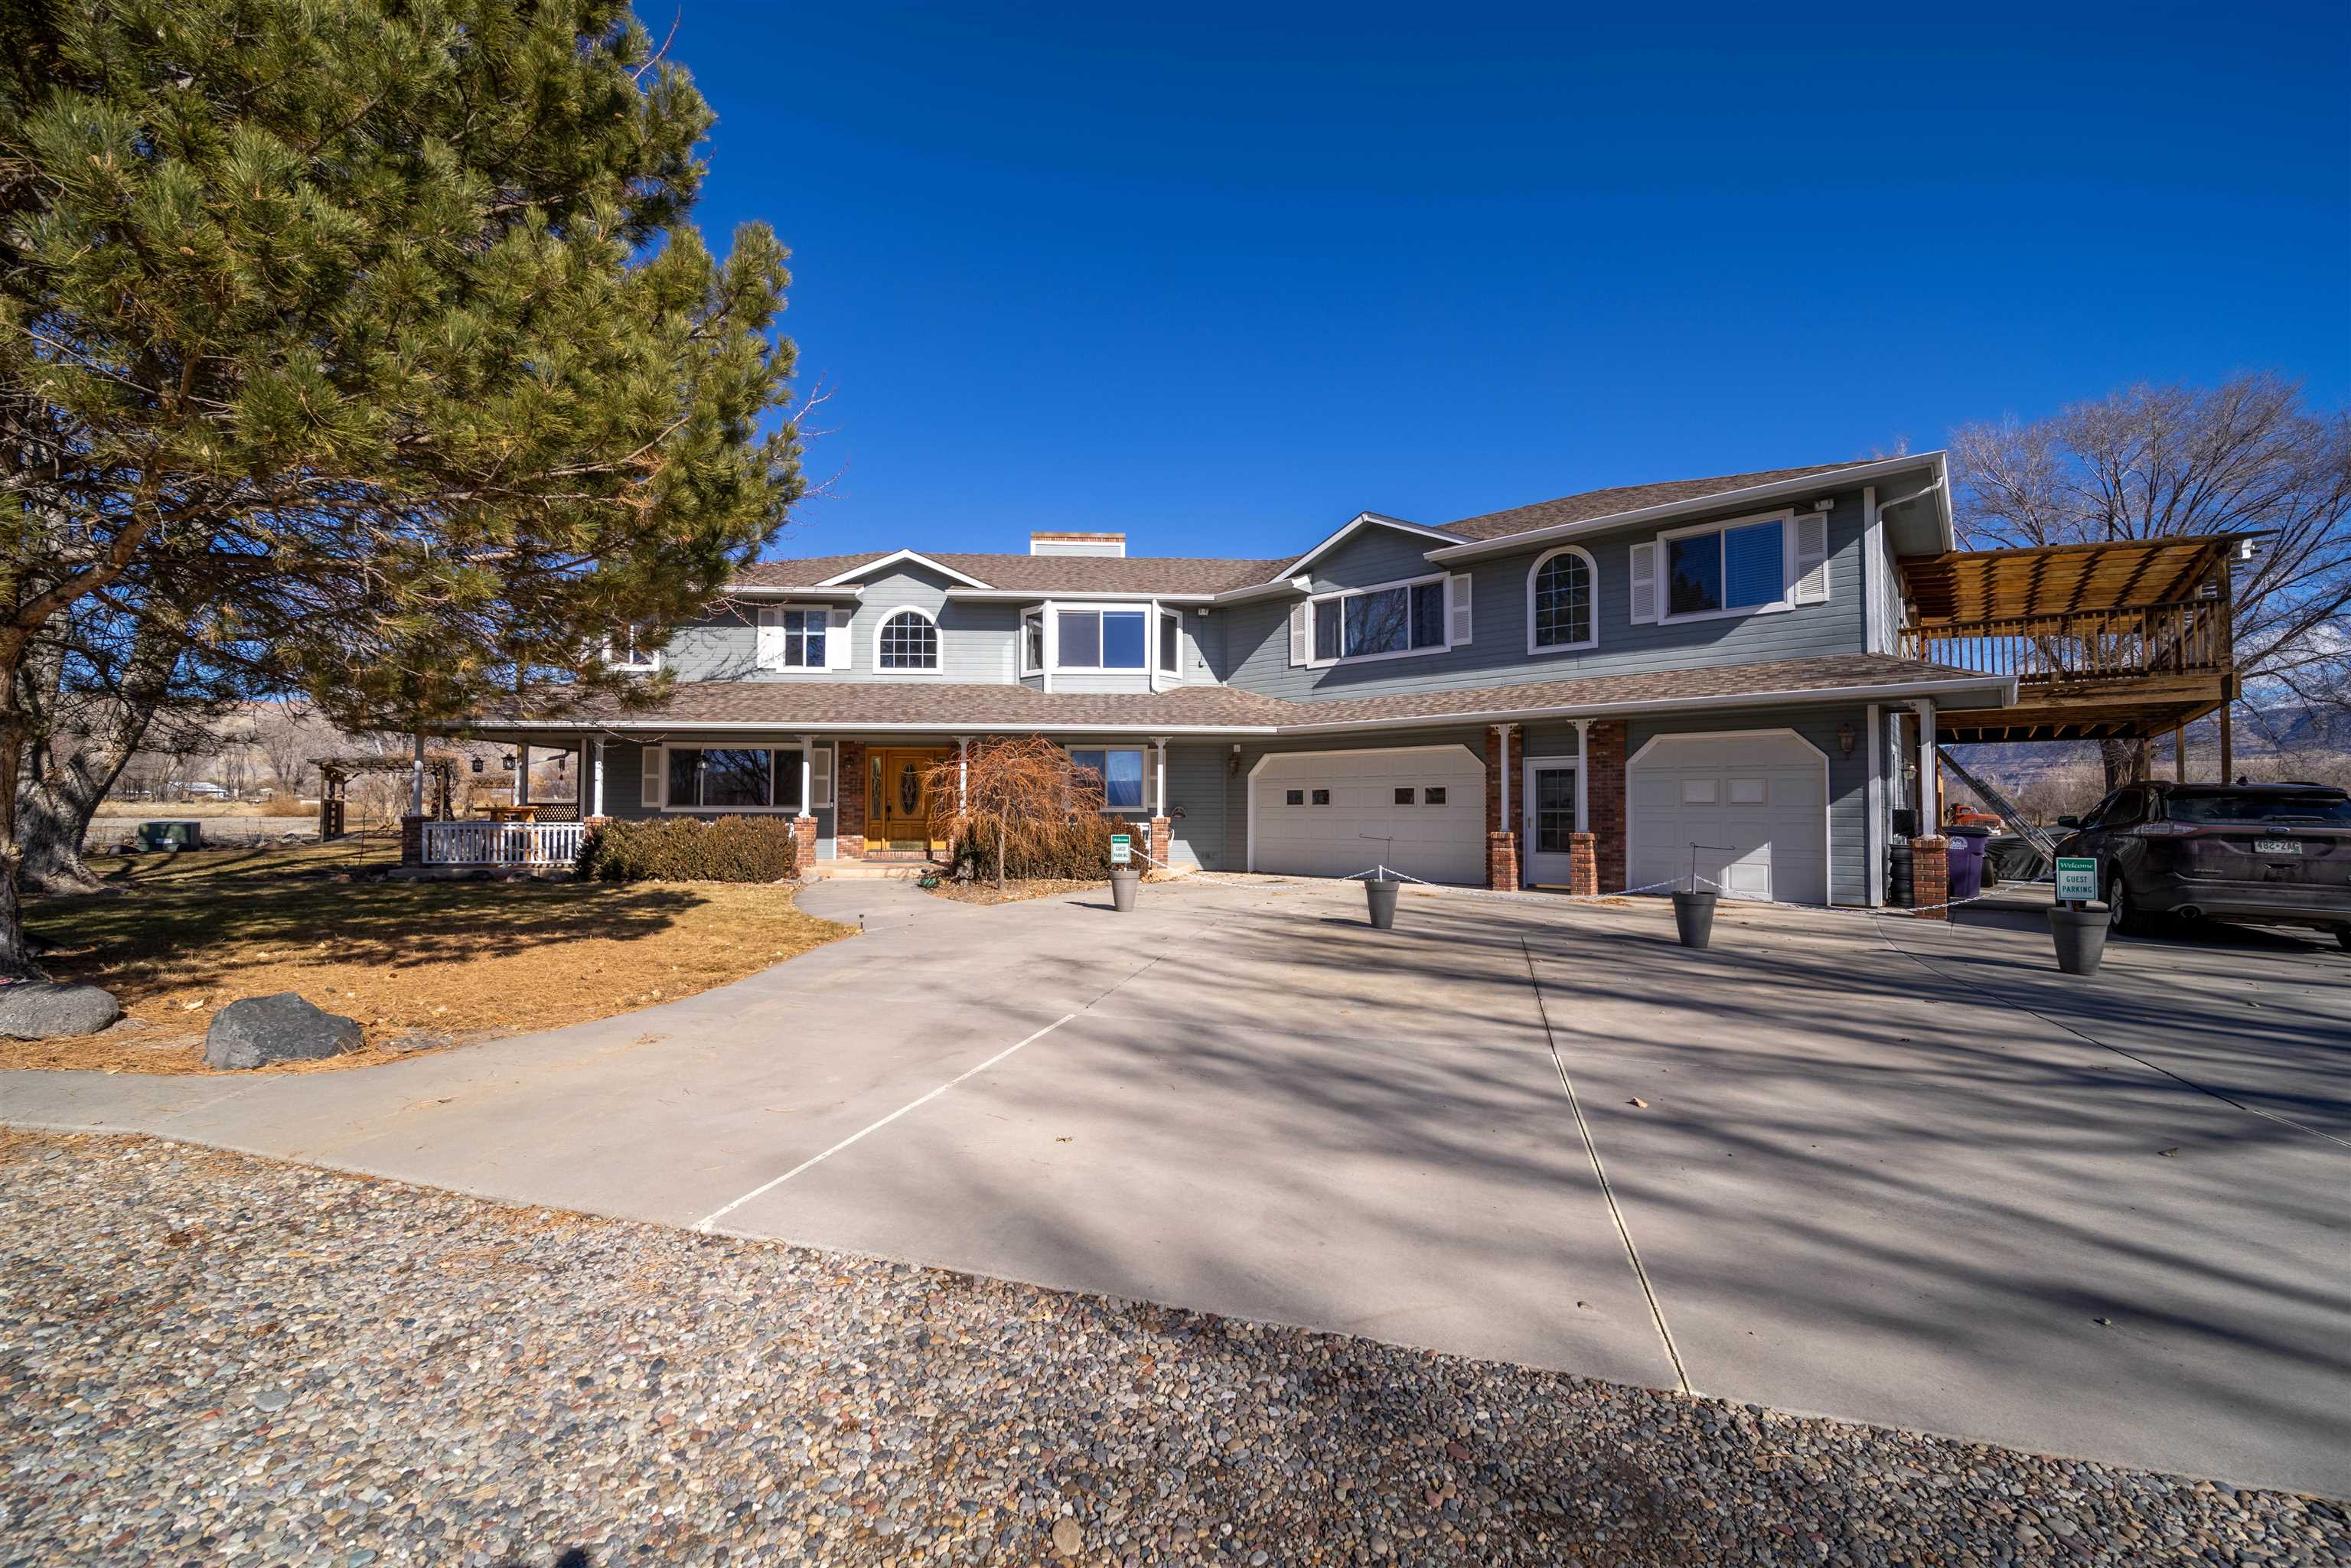 568 34 Road, Clifton, CO 81521